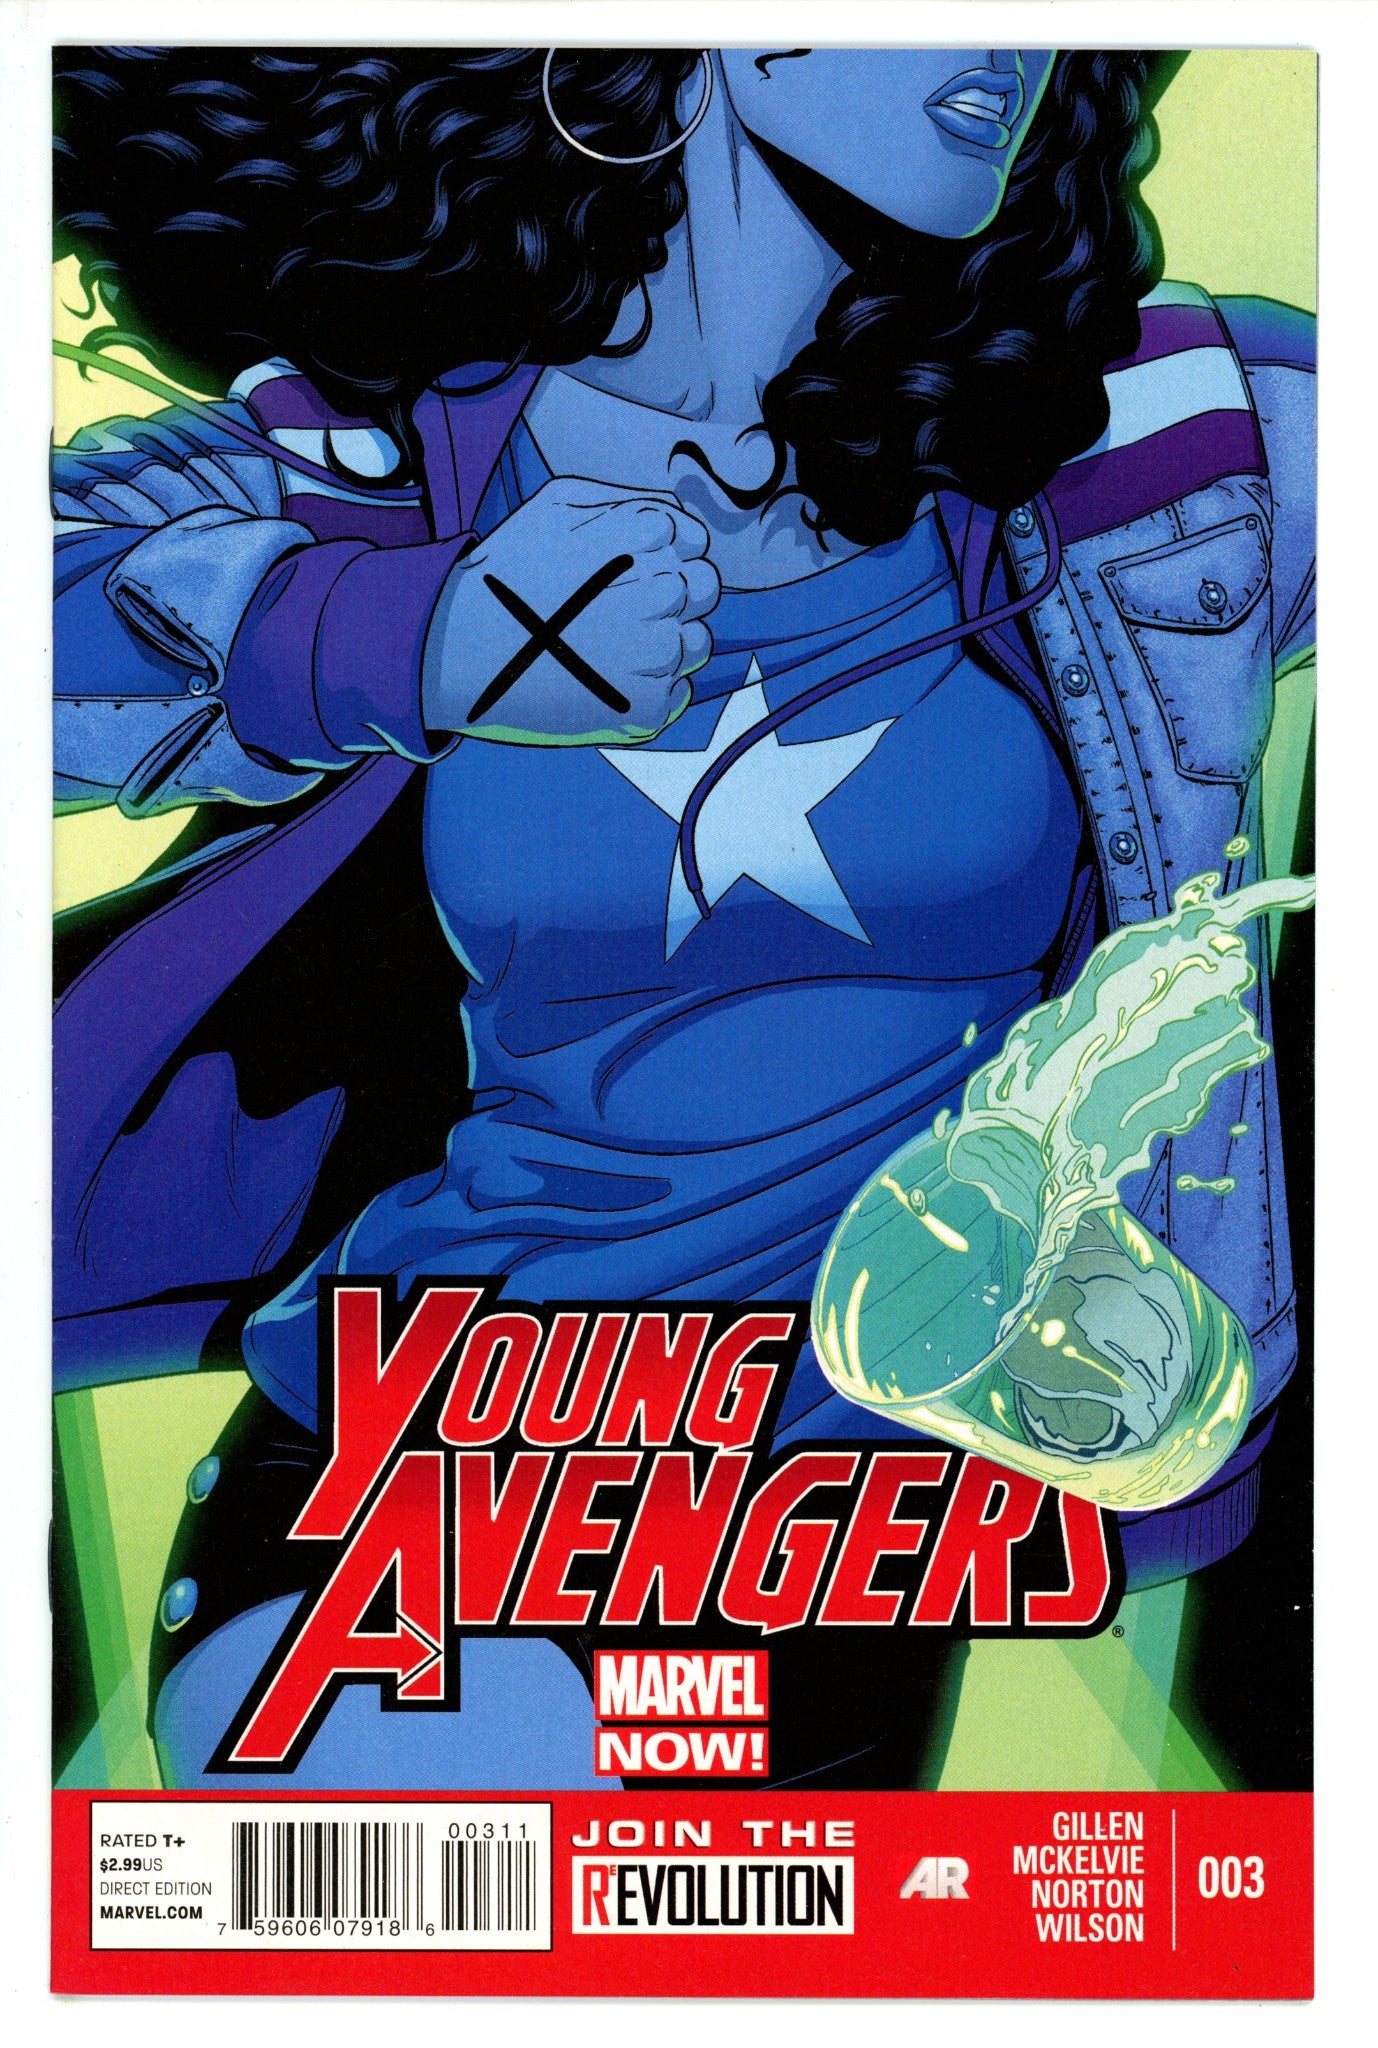 Young Avengers Vol 2 3 (2013)